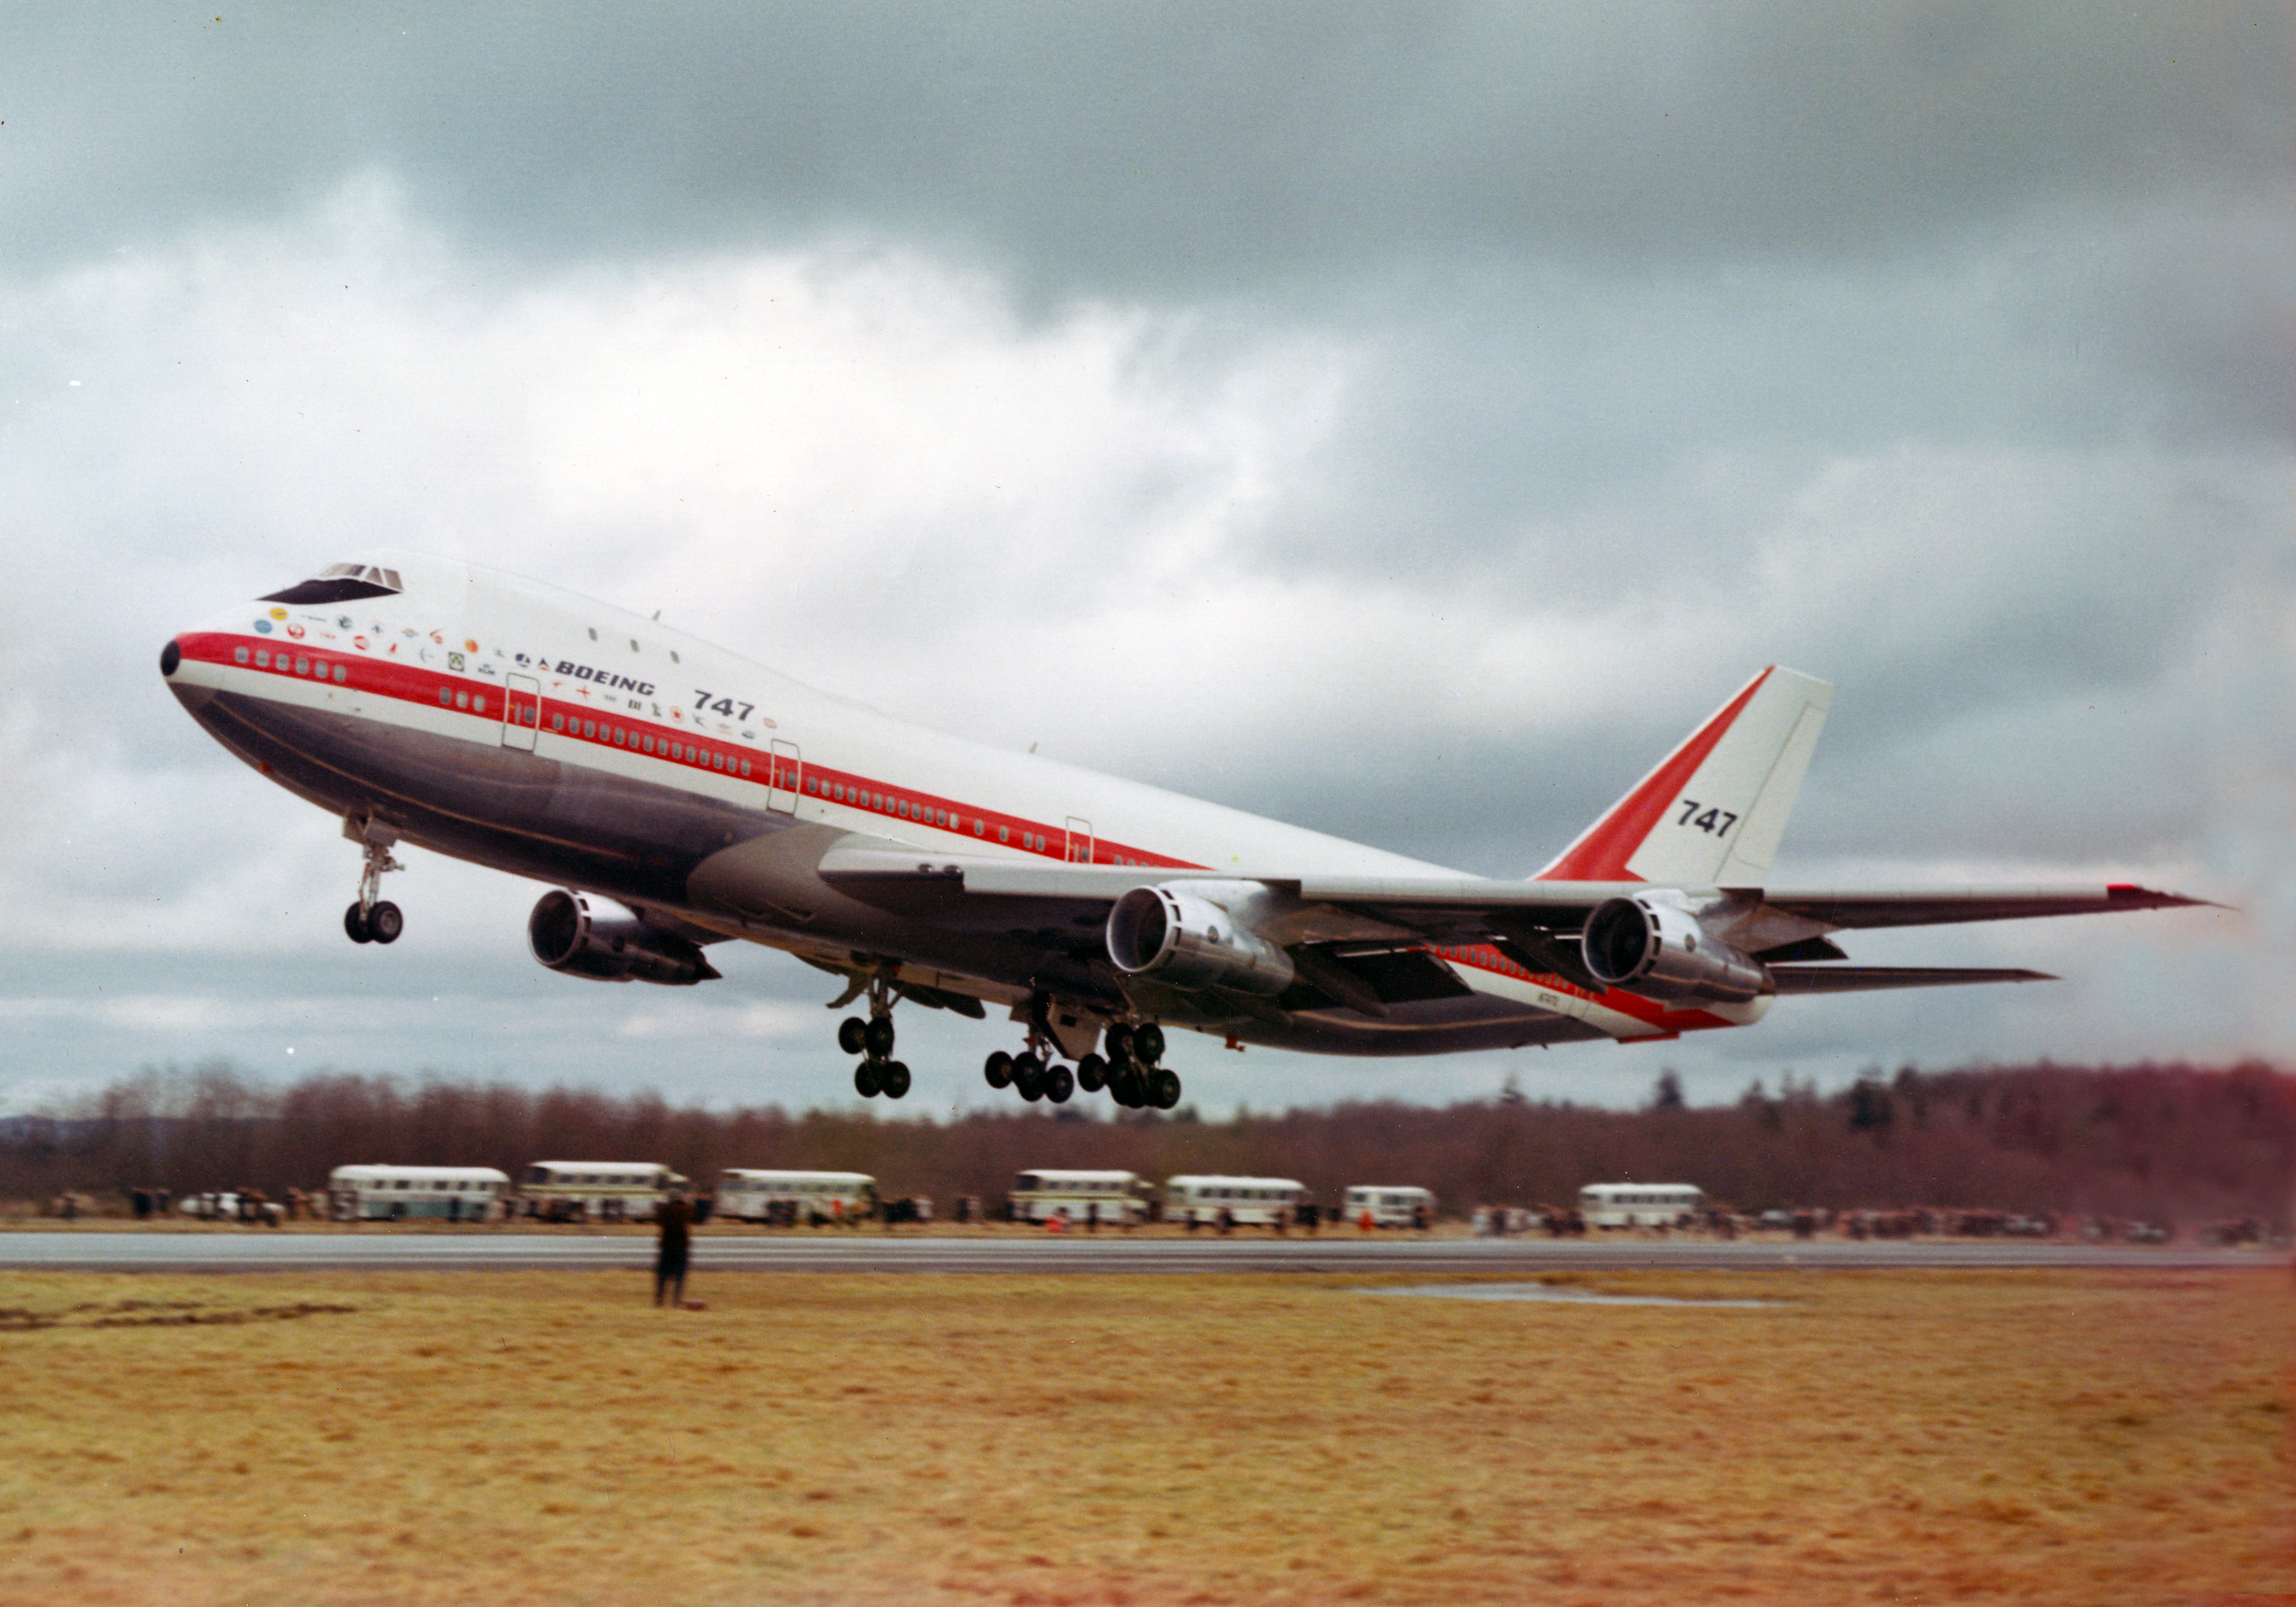 747 Variants Boeing Planes Boeing 747 Boeing Aircraft Images